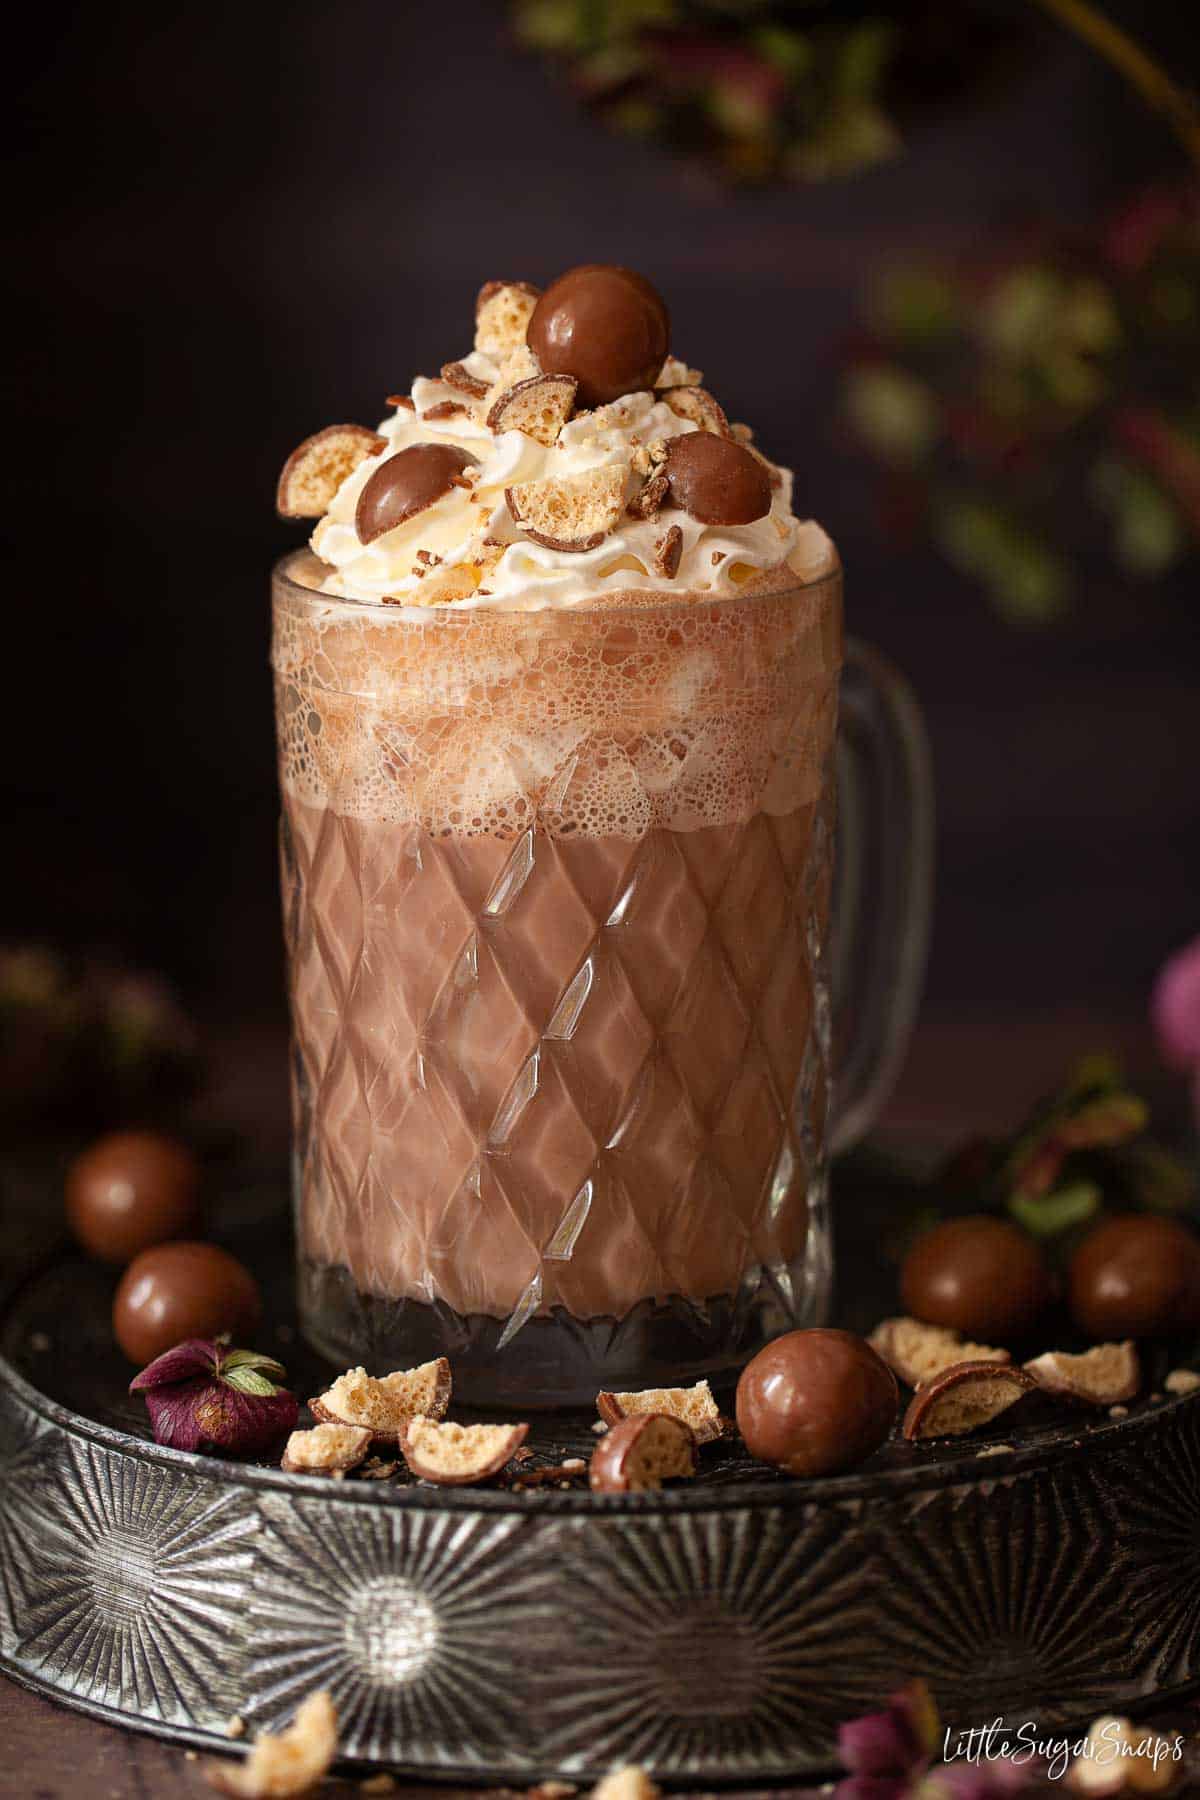 A malted chocolate drink in a vintage glass with cream and crushed chocolate on the top.